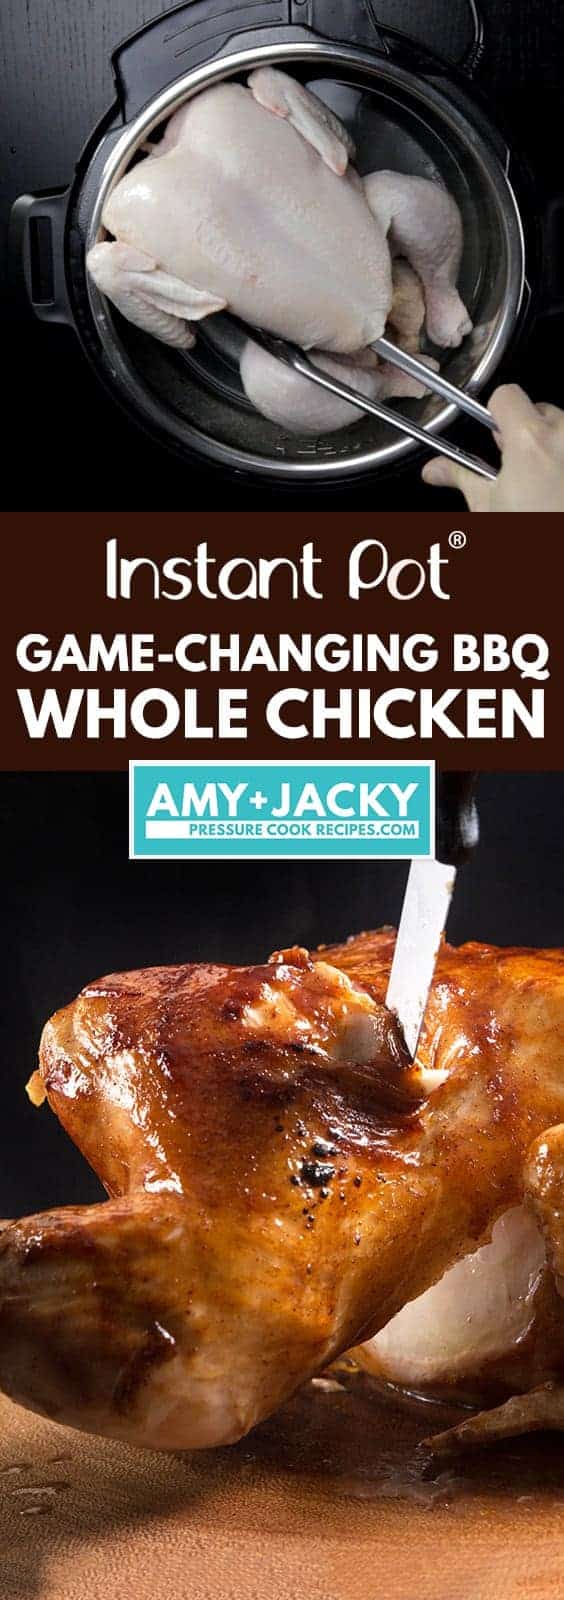 Instant Pot BBQ Whole Chicken Recipe (Pressure Cooker Whole Chicken): Make this 4-ingredient Game -Changing Instant Pot Whole Chicken in 3 Easy Steps! Tender, juicy chicken glazed with caramelized BBQ sauce. Super easy weeknight meal. #instantpot #instantpotrecipes #pressurecooker #pressurecookerrecipes #chicken #chickenrecipes #wholechicken